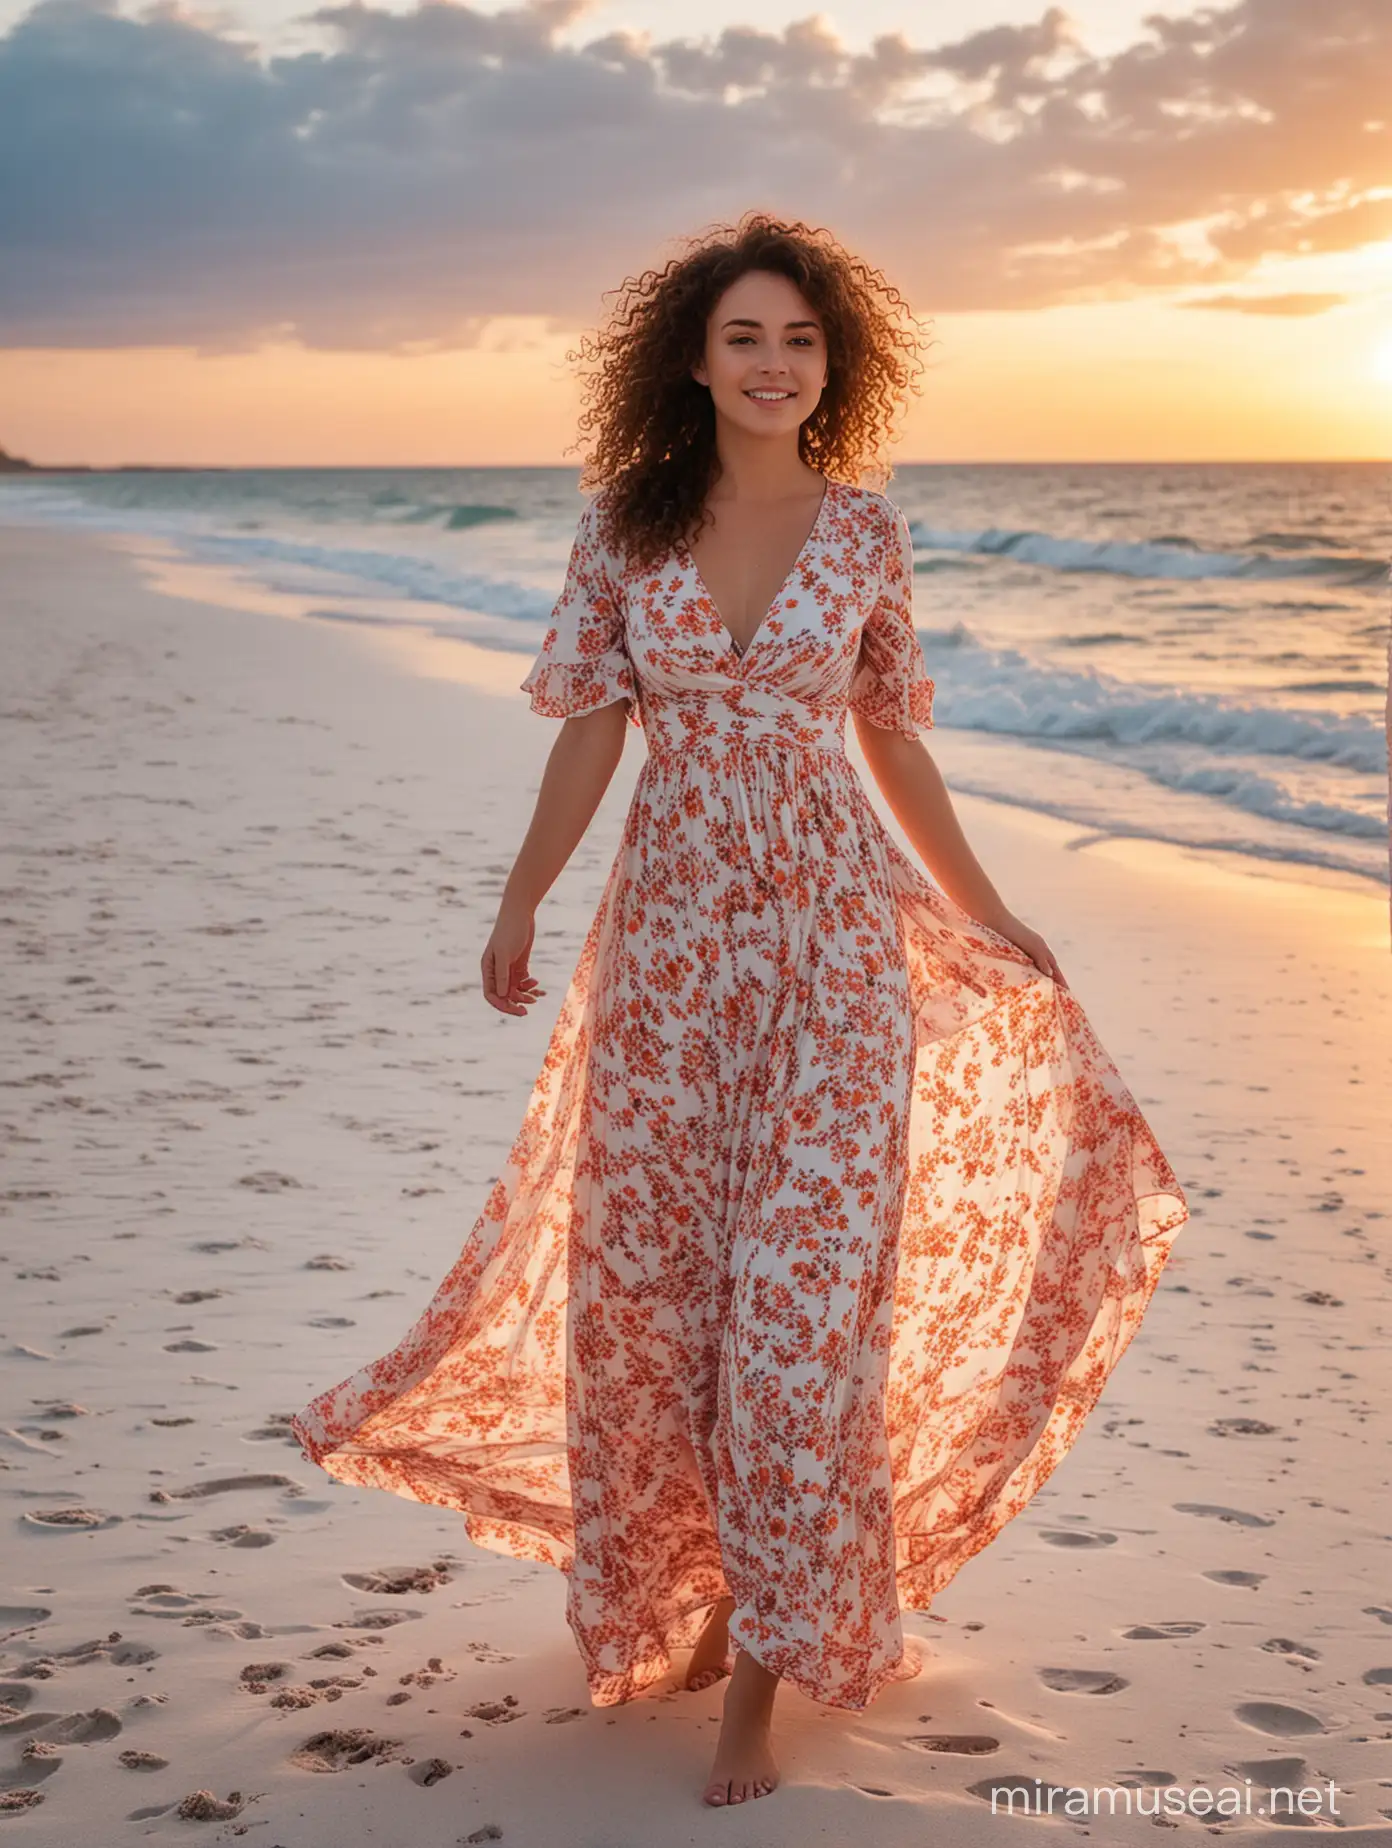 CurlyHaired Girl in Beautiful Dress at Sunset Beach